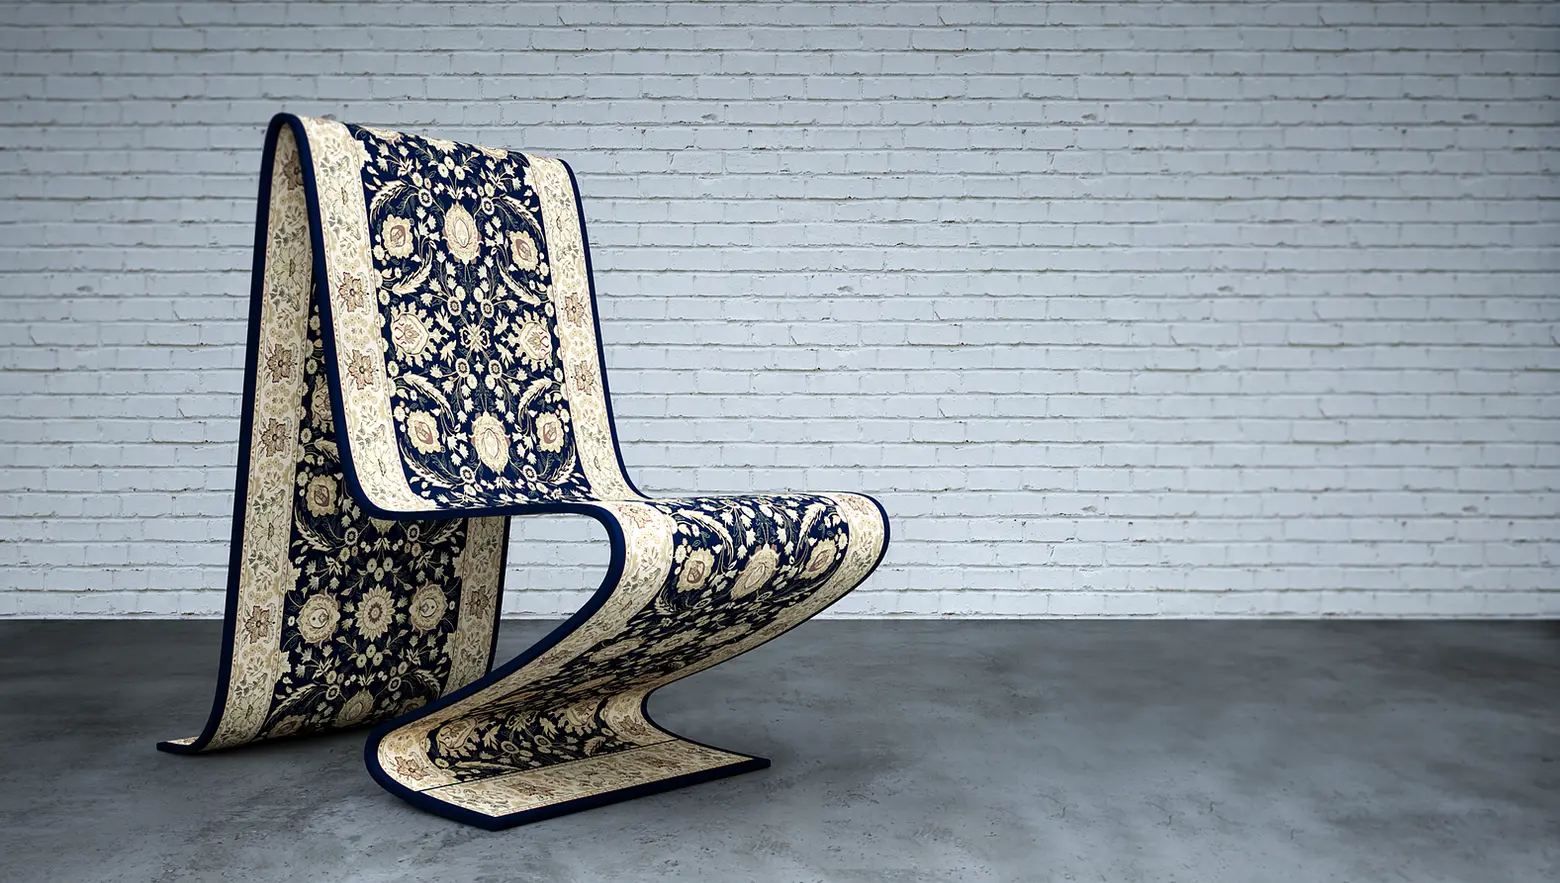 This Floating Persian Rug Is Actually a Sturdy Chair